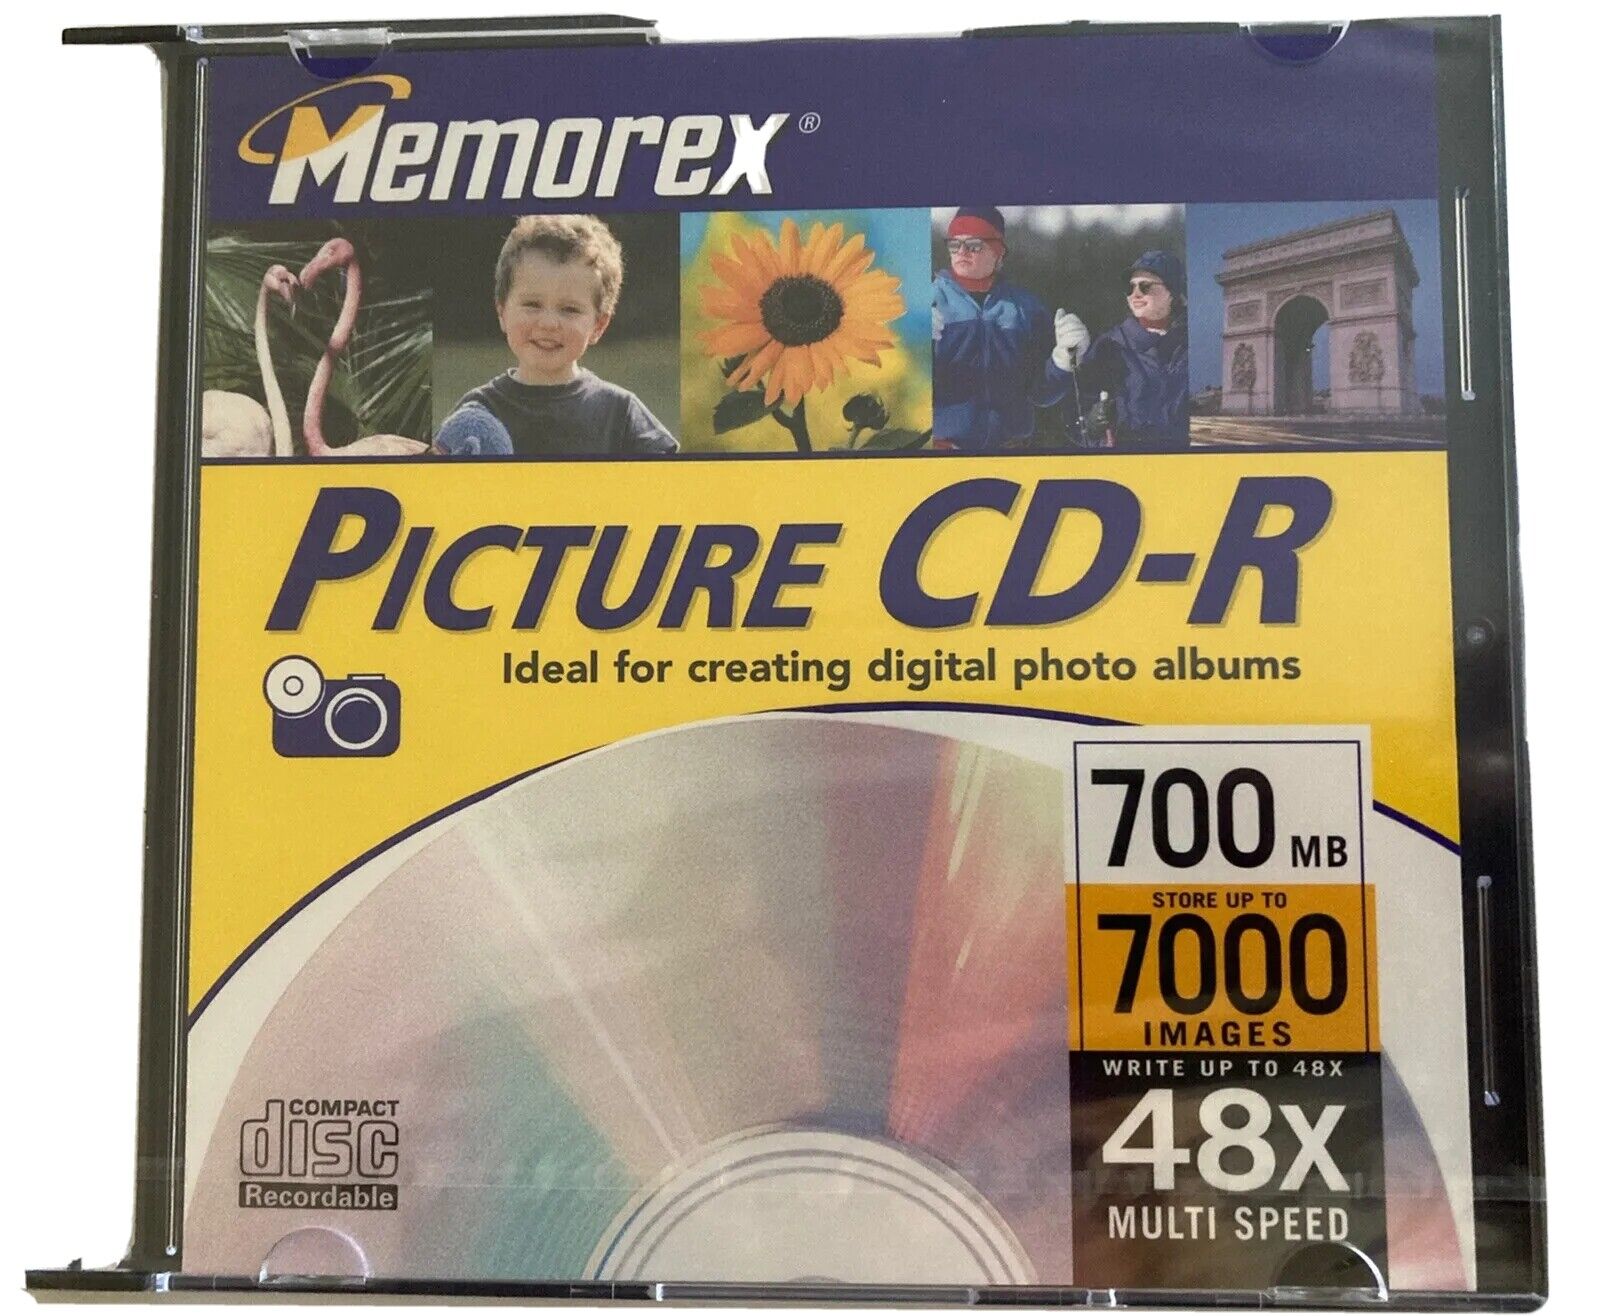 Picture CD-R, 700MB, 48x Multi Speed, New Factory Sealed